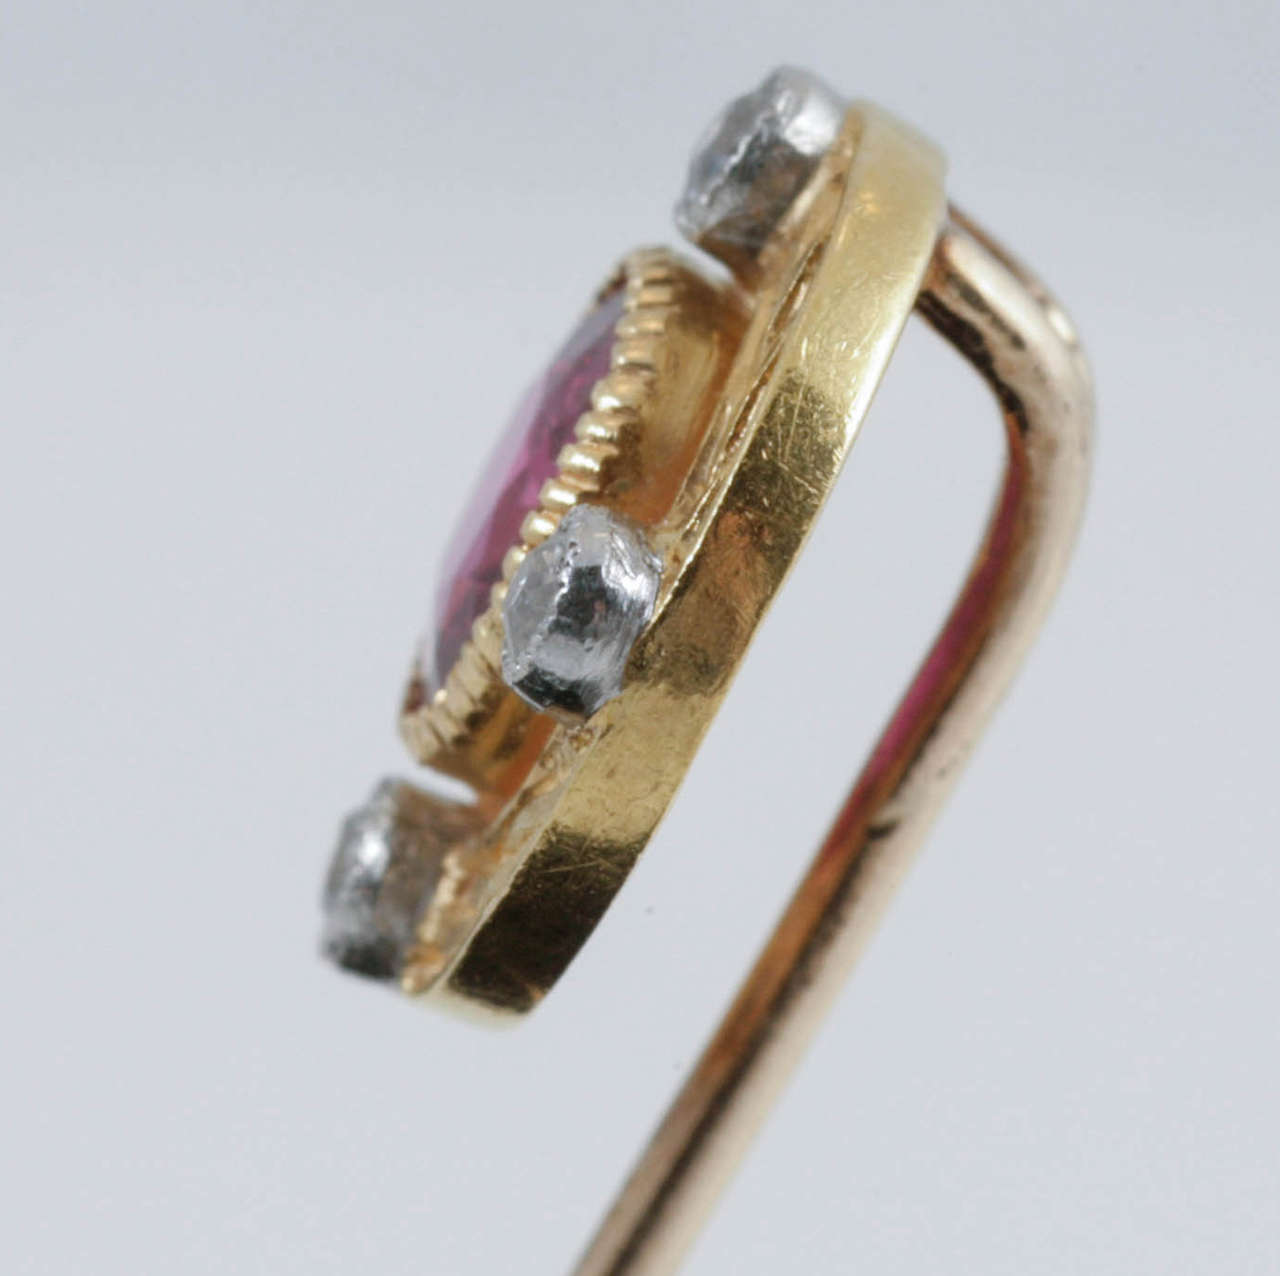 A yellow gold mounted tie pin set with a Burma ruby centre, surrounded by four, old cut brilliant cut diamonds set in platinum within a carved yellow gold setting.
Measures 11mm across.
Antique piece (over 100 years old) in the Edwardian